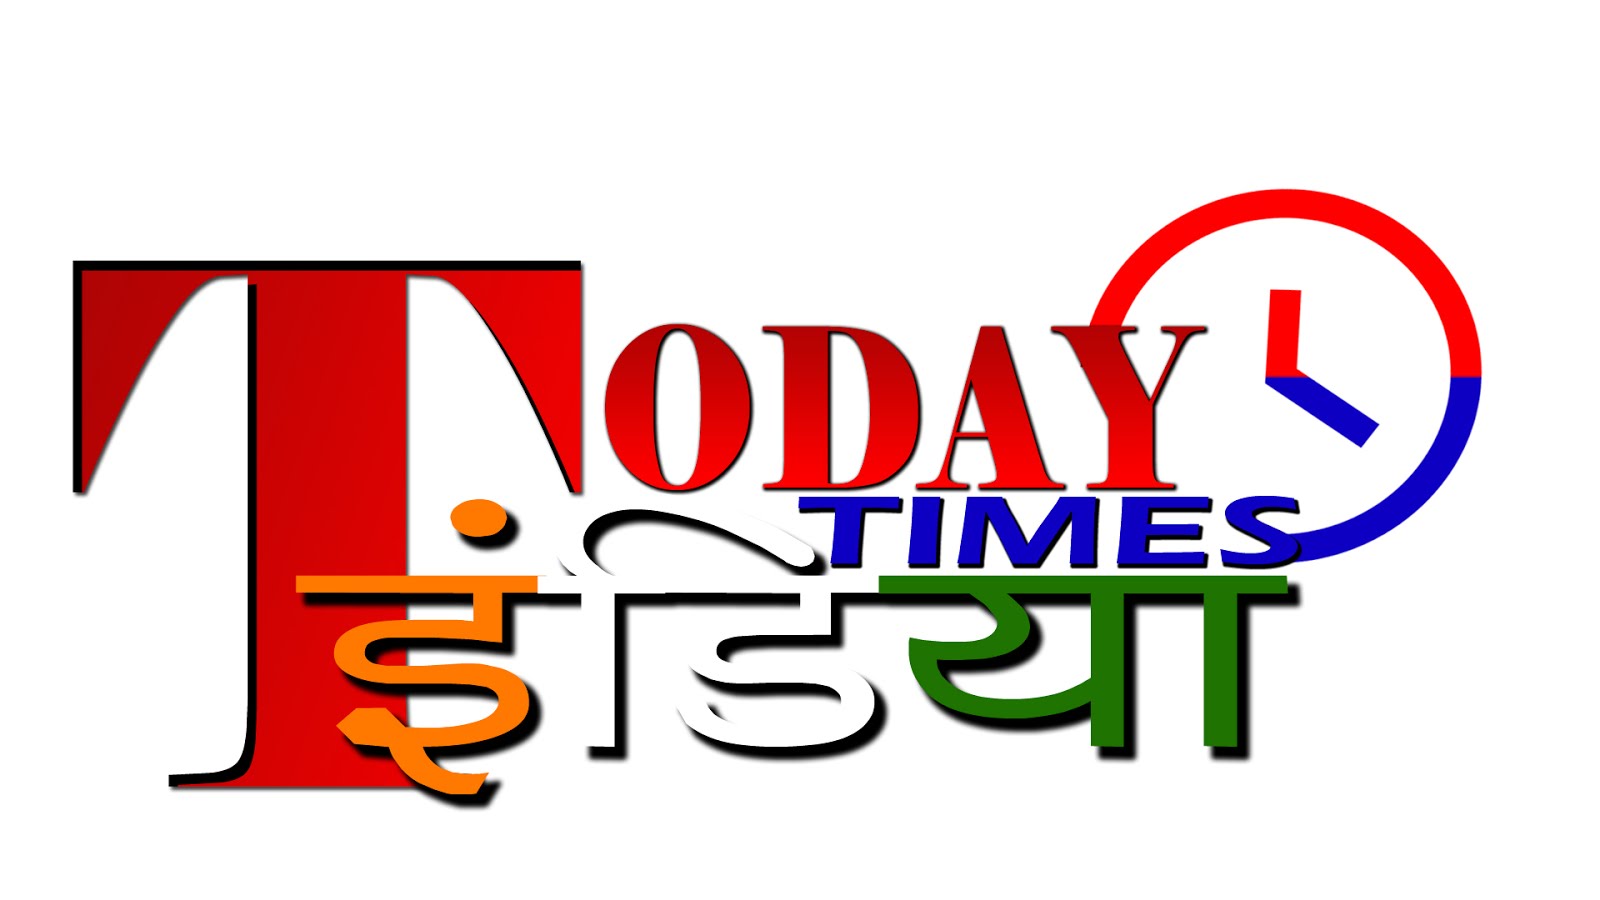 The Today Times India News